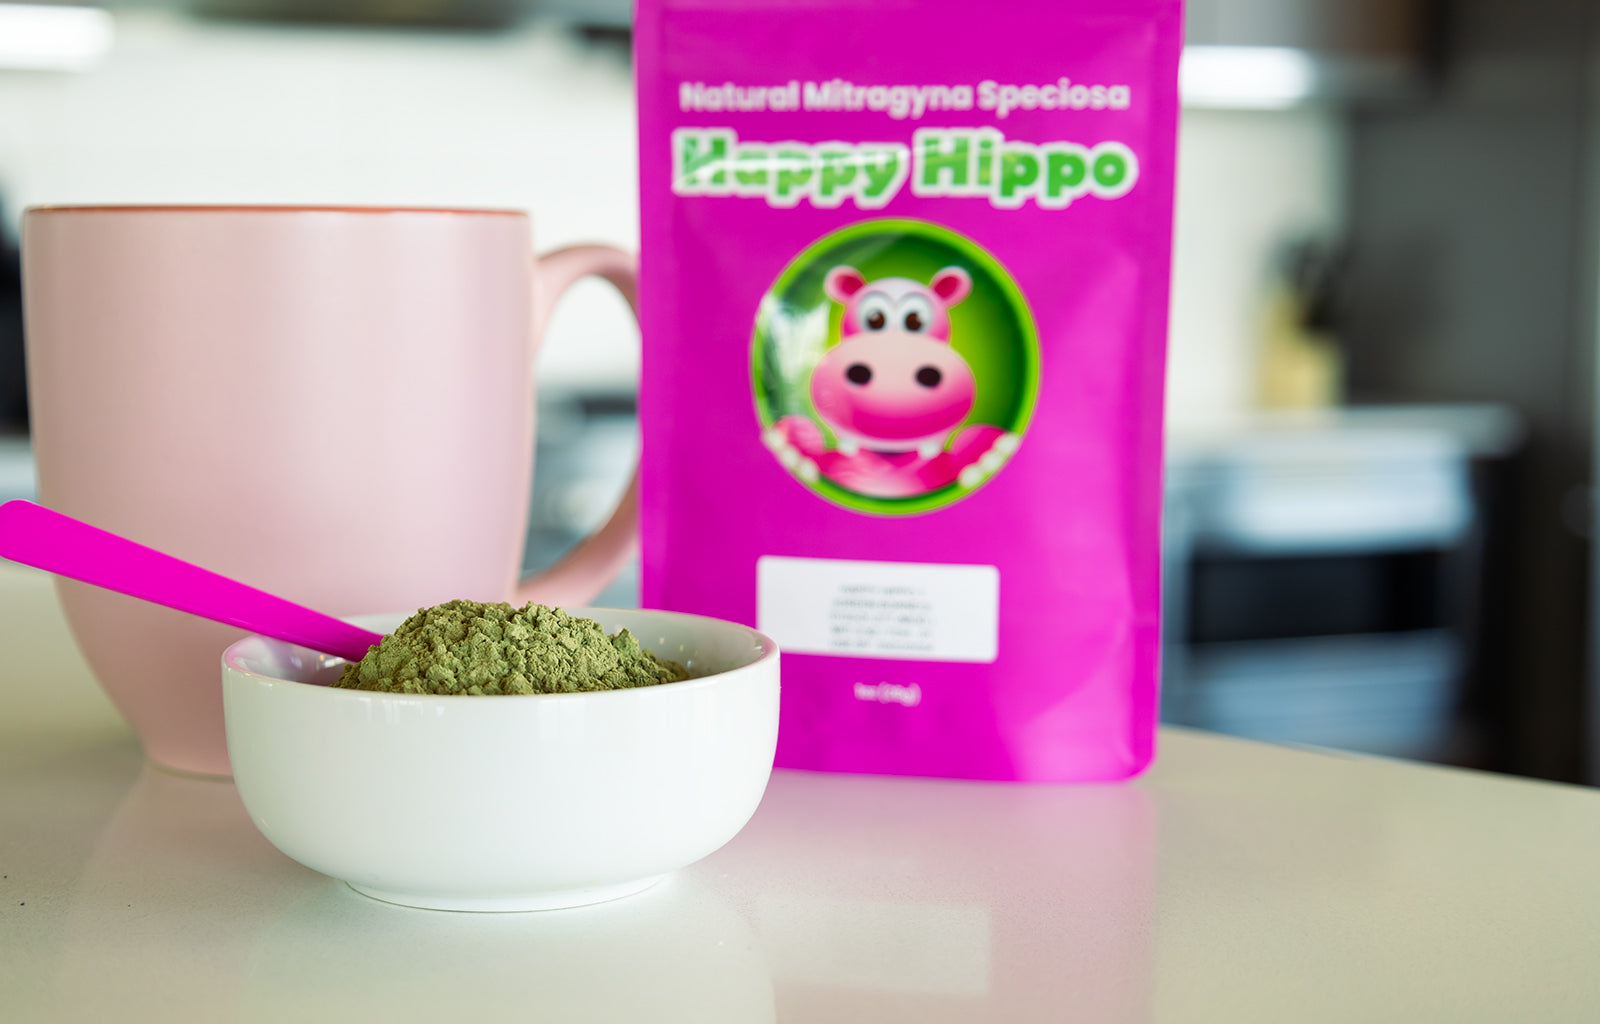 Featured image depicting a Happy Hippo branded packet of Malay Kratom sitting on a kitchen counter. A pink kratom tea cup, and a bowl of loose Malay Kratom Powder sits in the foreground.